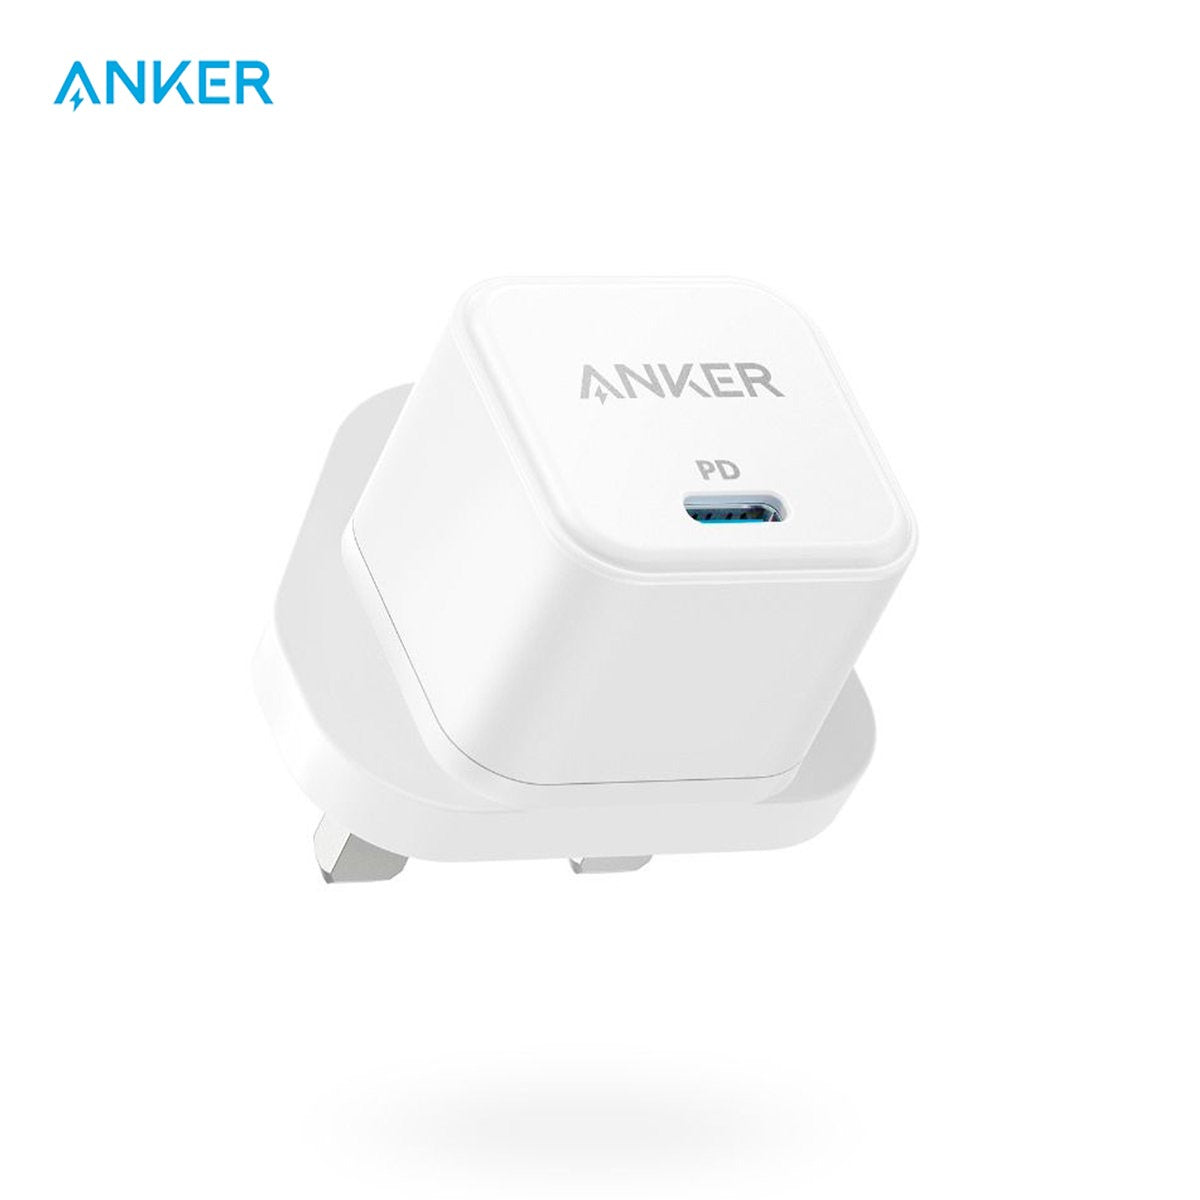 Anker PowerPort III 20W Cube USB-C Port High-Speed Mini Charger featuring the port